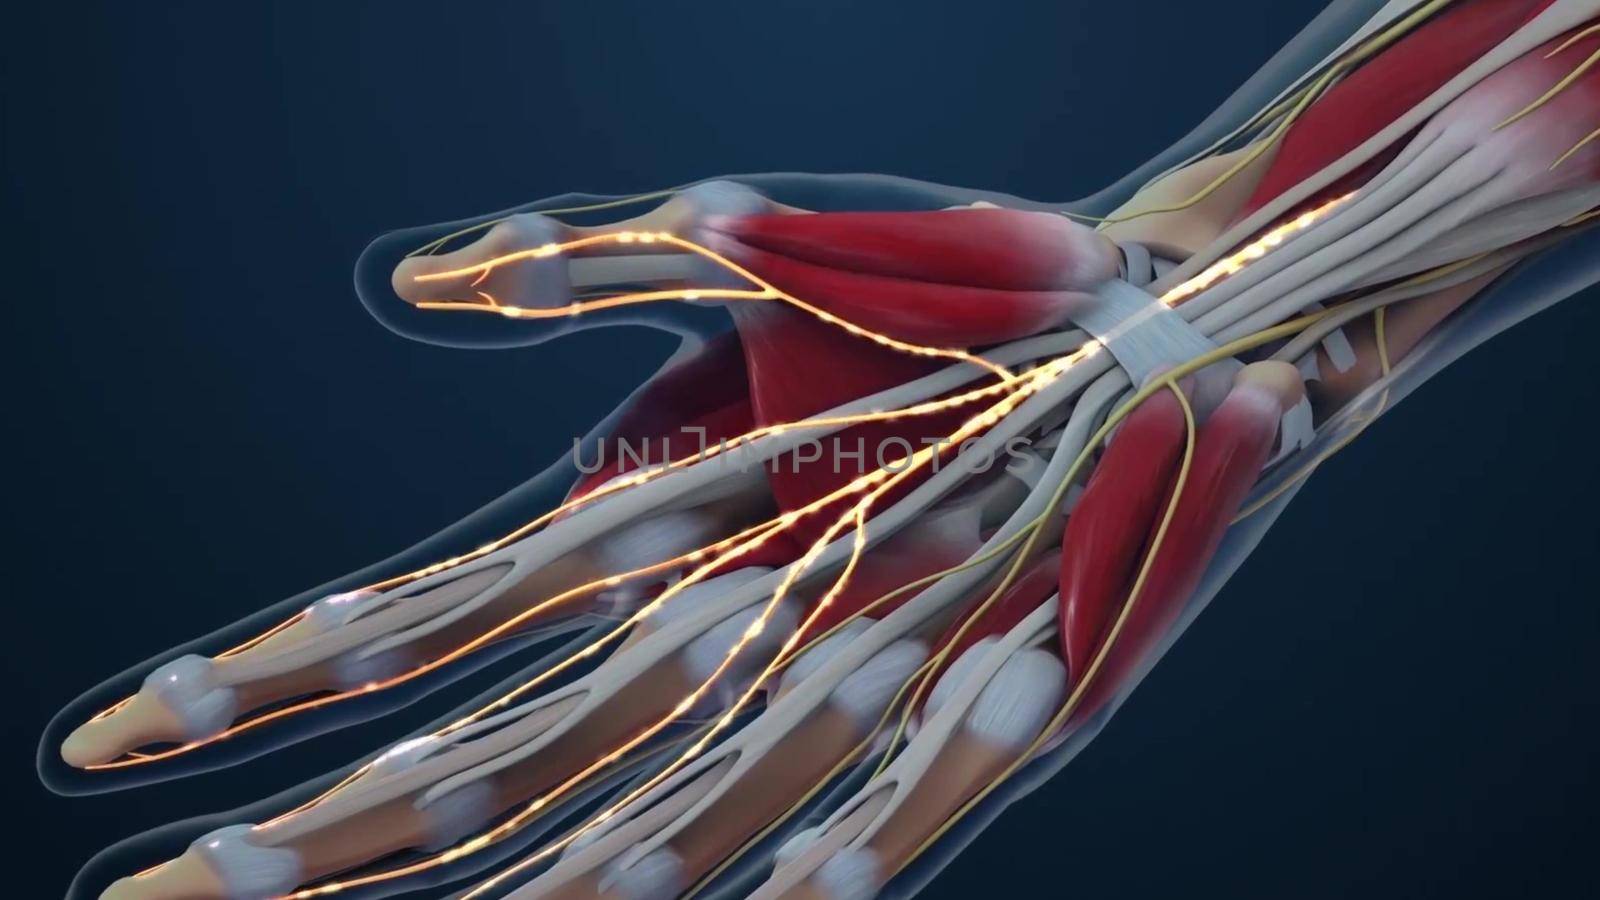 Carpal tunnel syndrome (CTS), numbness, tingling and pain condition in wrist by creativepic